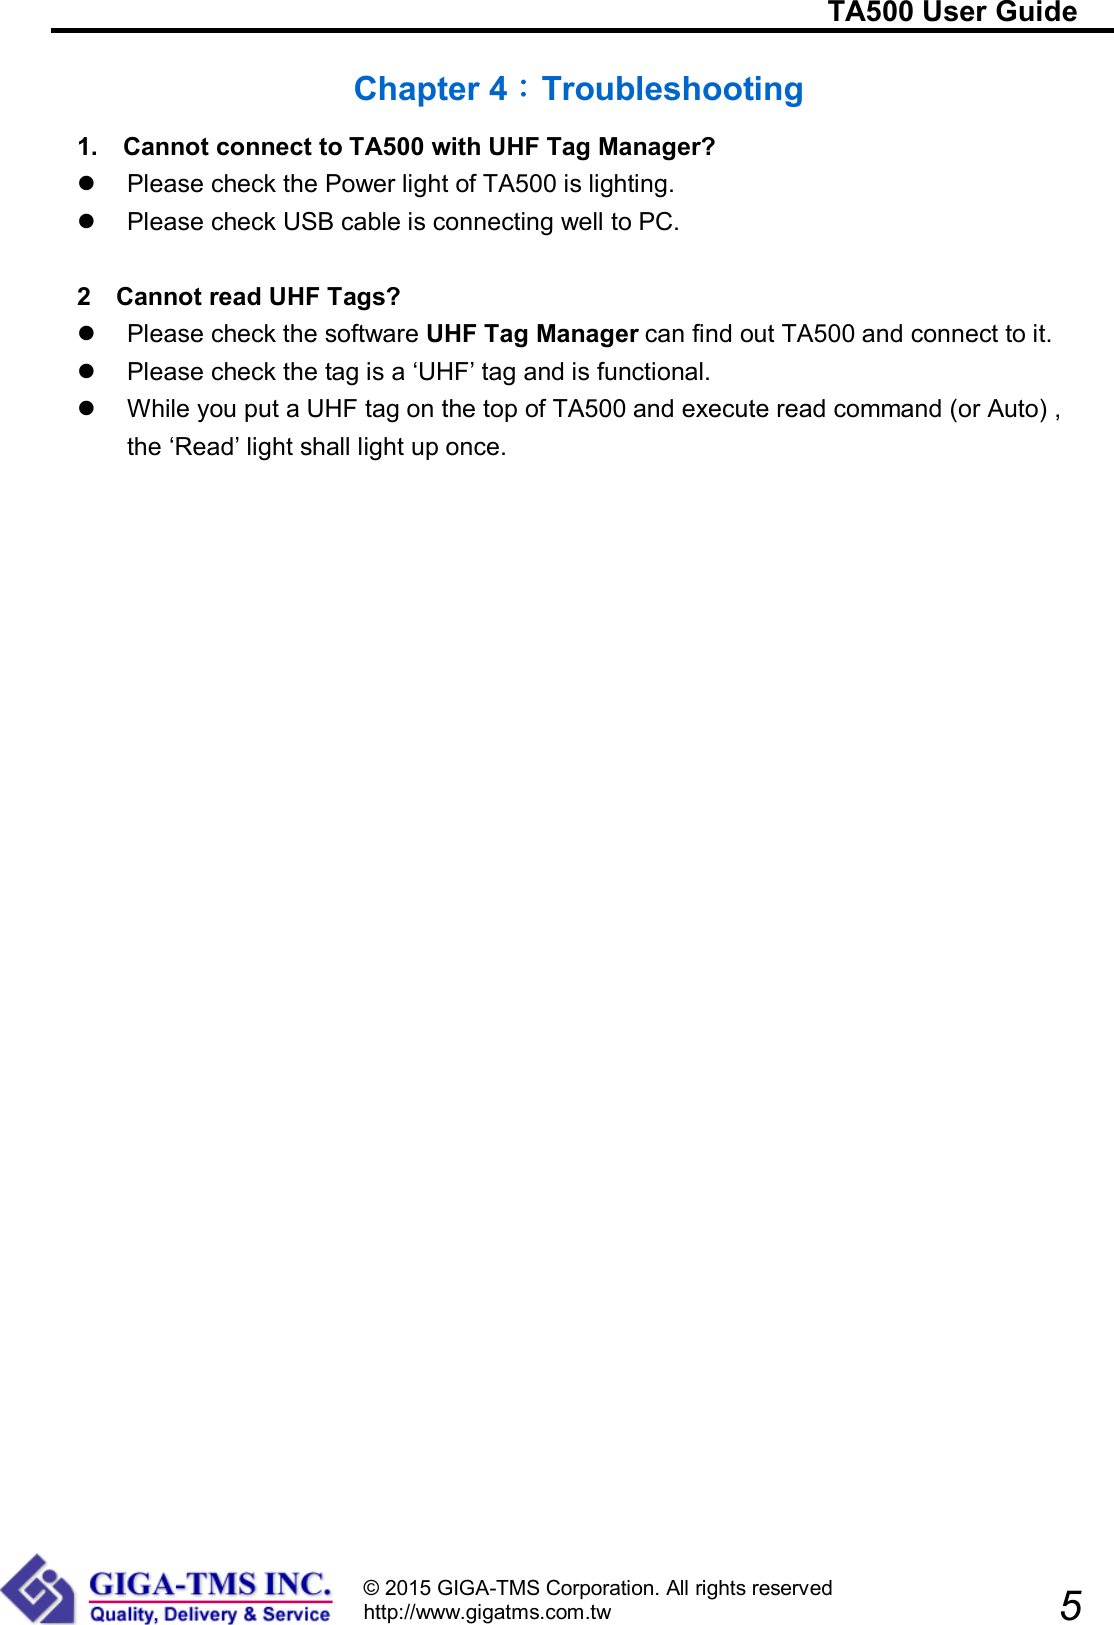                                                                         TA500 User Guide                            5 © 2015 GIGA-TMS Corporation. All rights reserved http://www.gigatms.com.tw  Chapter 4：Troubleshooting 1.    Cannot connect to TA500 with UHF Tag Manager?   Please check the Power light of TA500 is lighting.   Please check USB cable is connecting well to PC.  2  Cannot read UHF Tags?   Please check the software UHF Tag Manager can find out TA500 and connect to it.   Please check the tag is a ‘UHF’ tag and is functional.   While you put a UHF tag on the top of TA500 and execute read command (or Auto) , the ‘Read’ light shall light up once.   